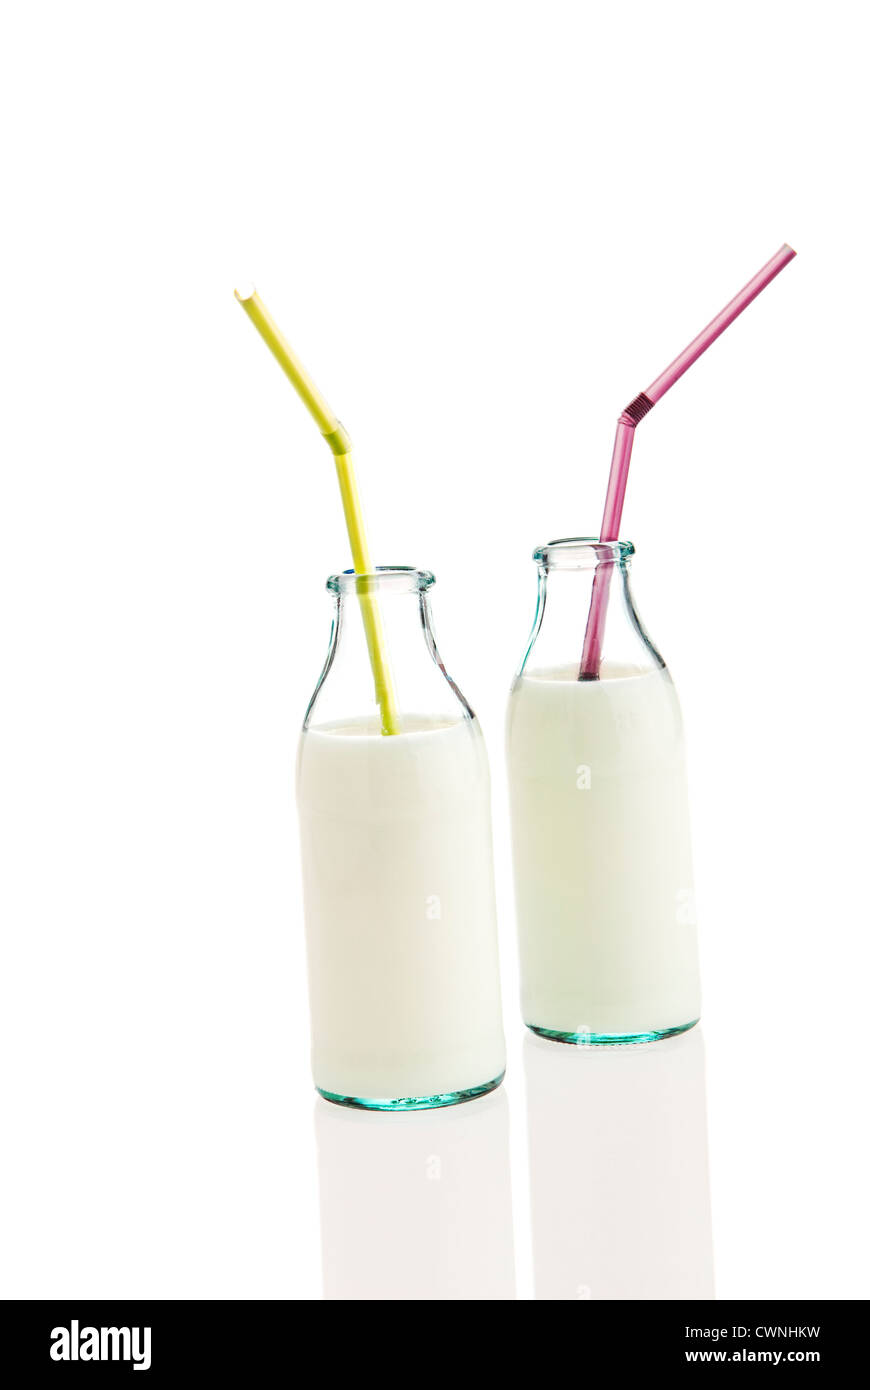 Milk in bottles with straws, isolated on 100% white background Stock Photo